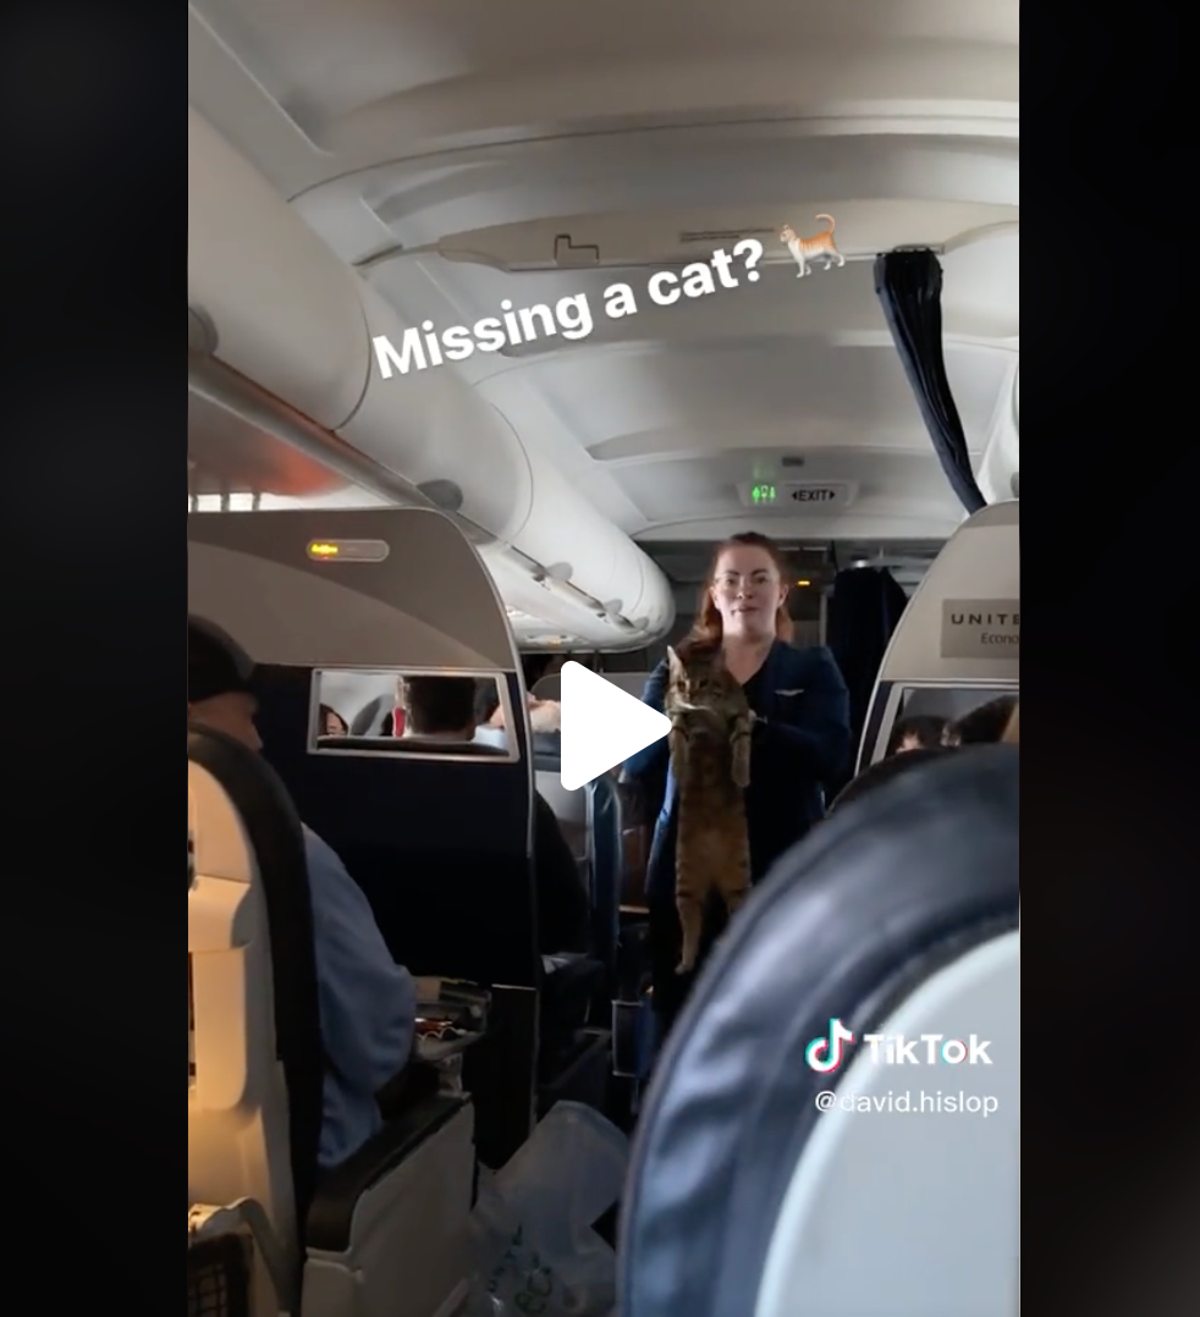 ‘Anybody missing a cat?’ Chaos as feline escapes carrier on plane